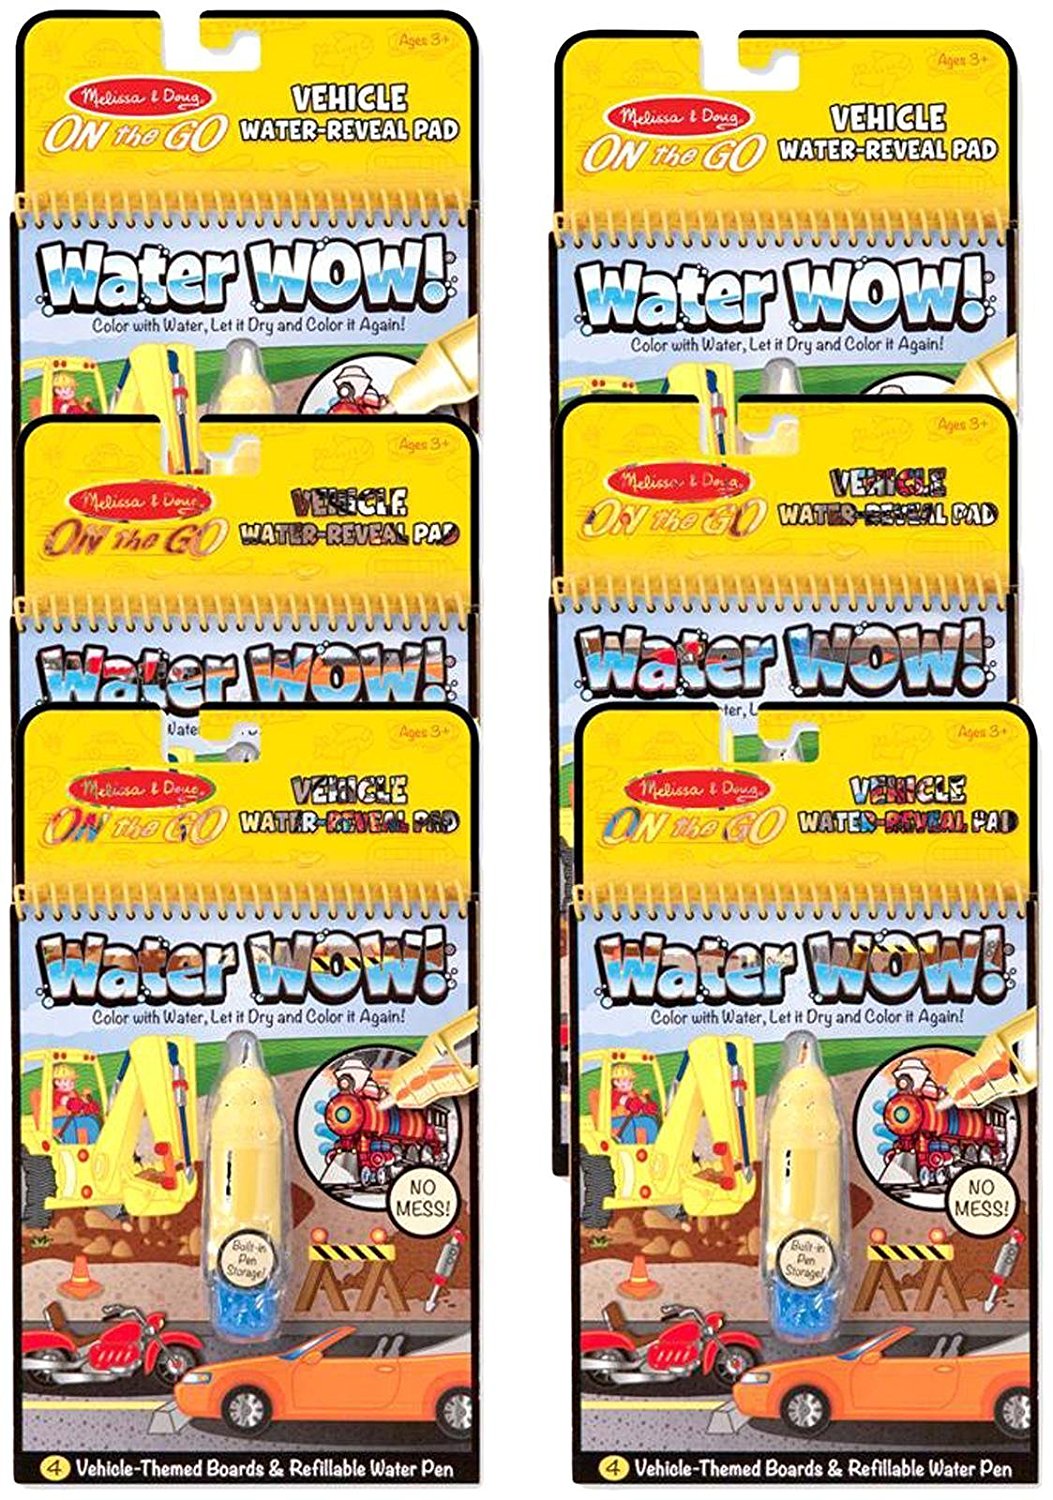 Melissa & Doug On the Go Water Wow! Activity Book (6 Pack) Only $16.13!